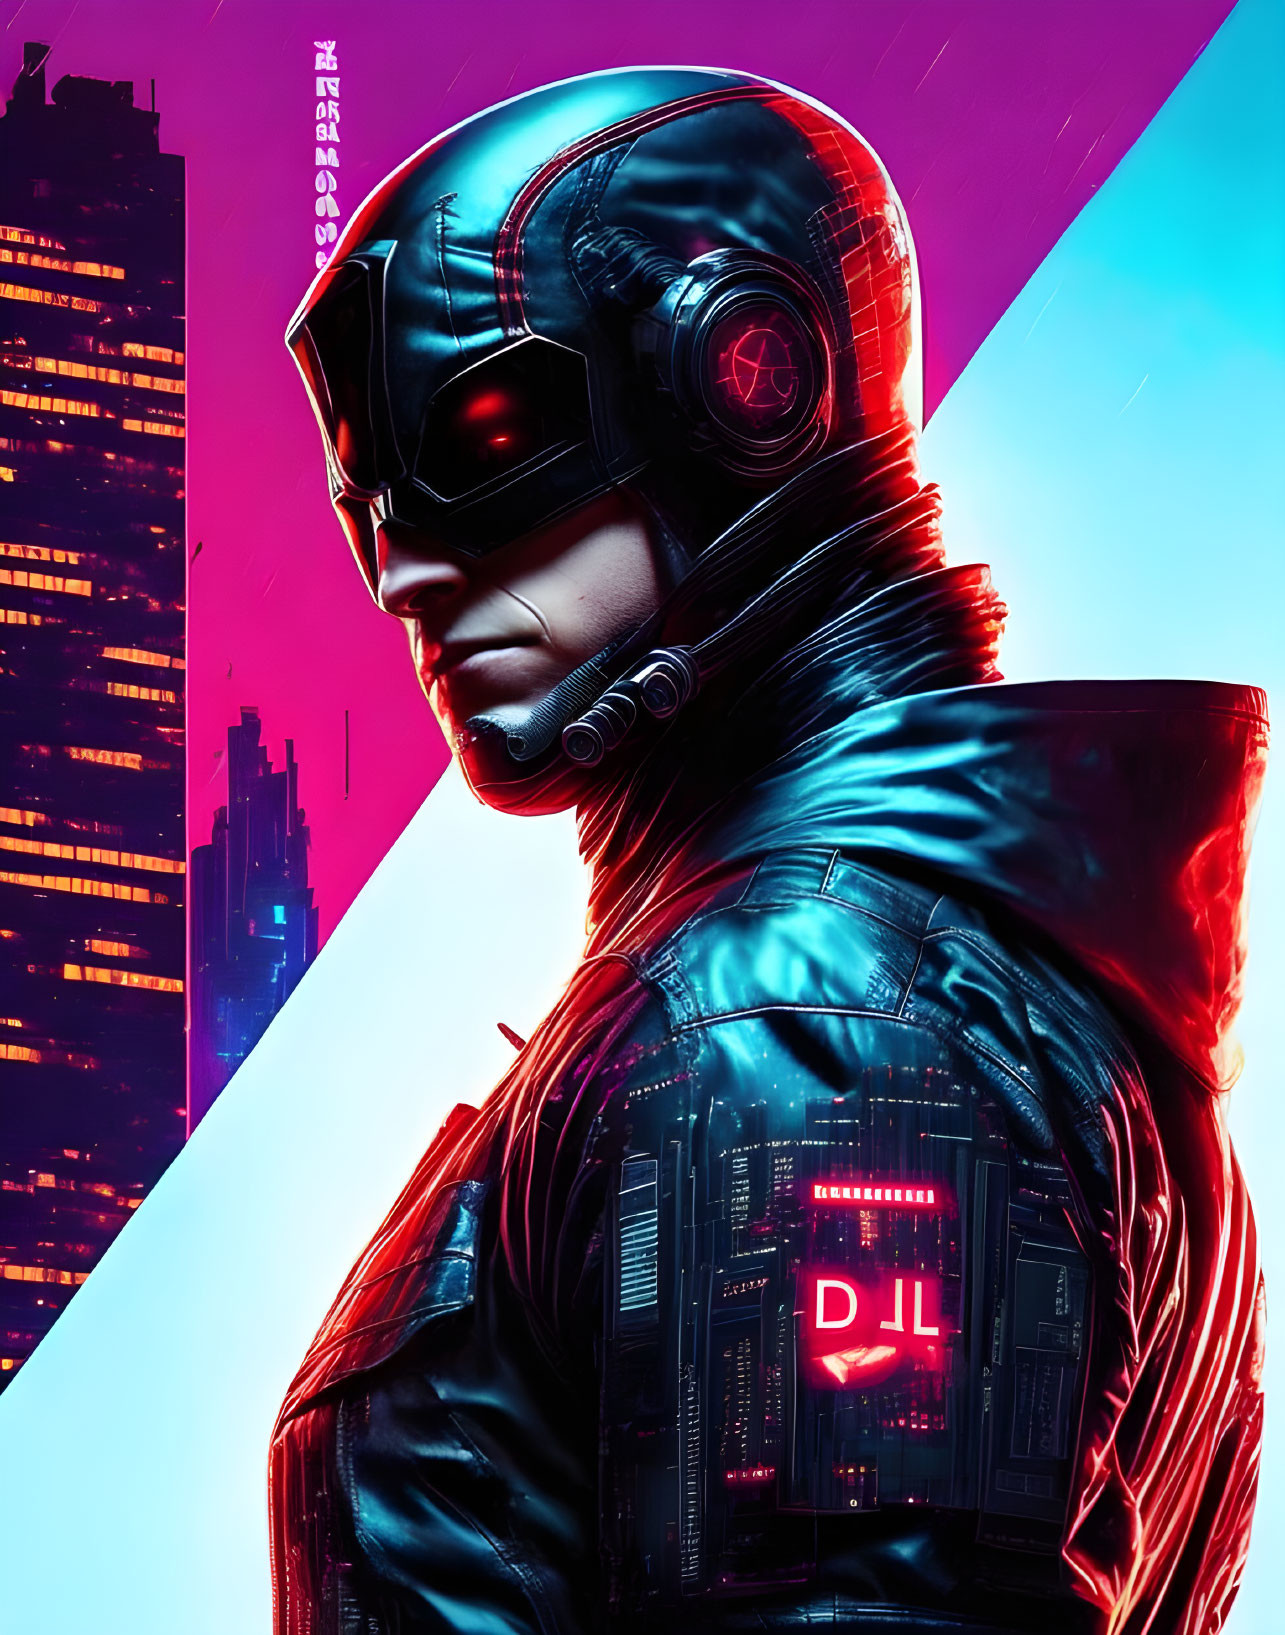 Close-Up Futuristic Helmet with Neon Highlights in Red and Blue Cityscape